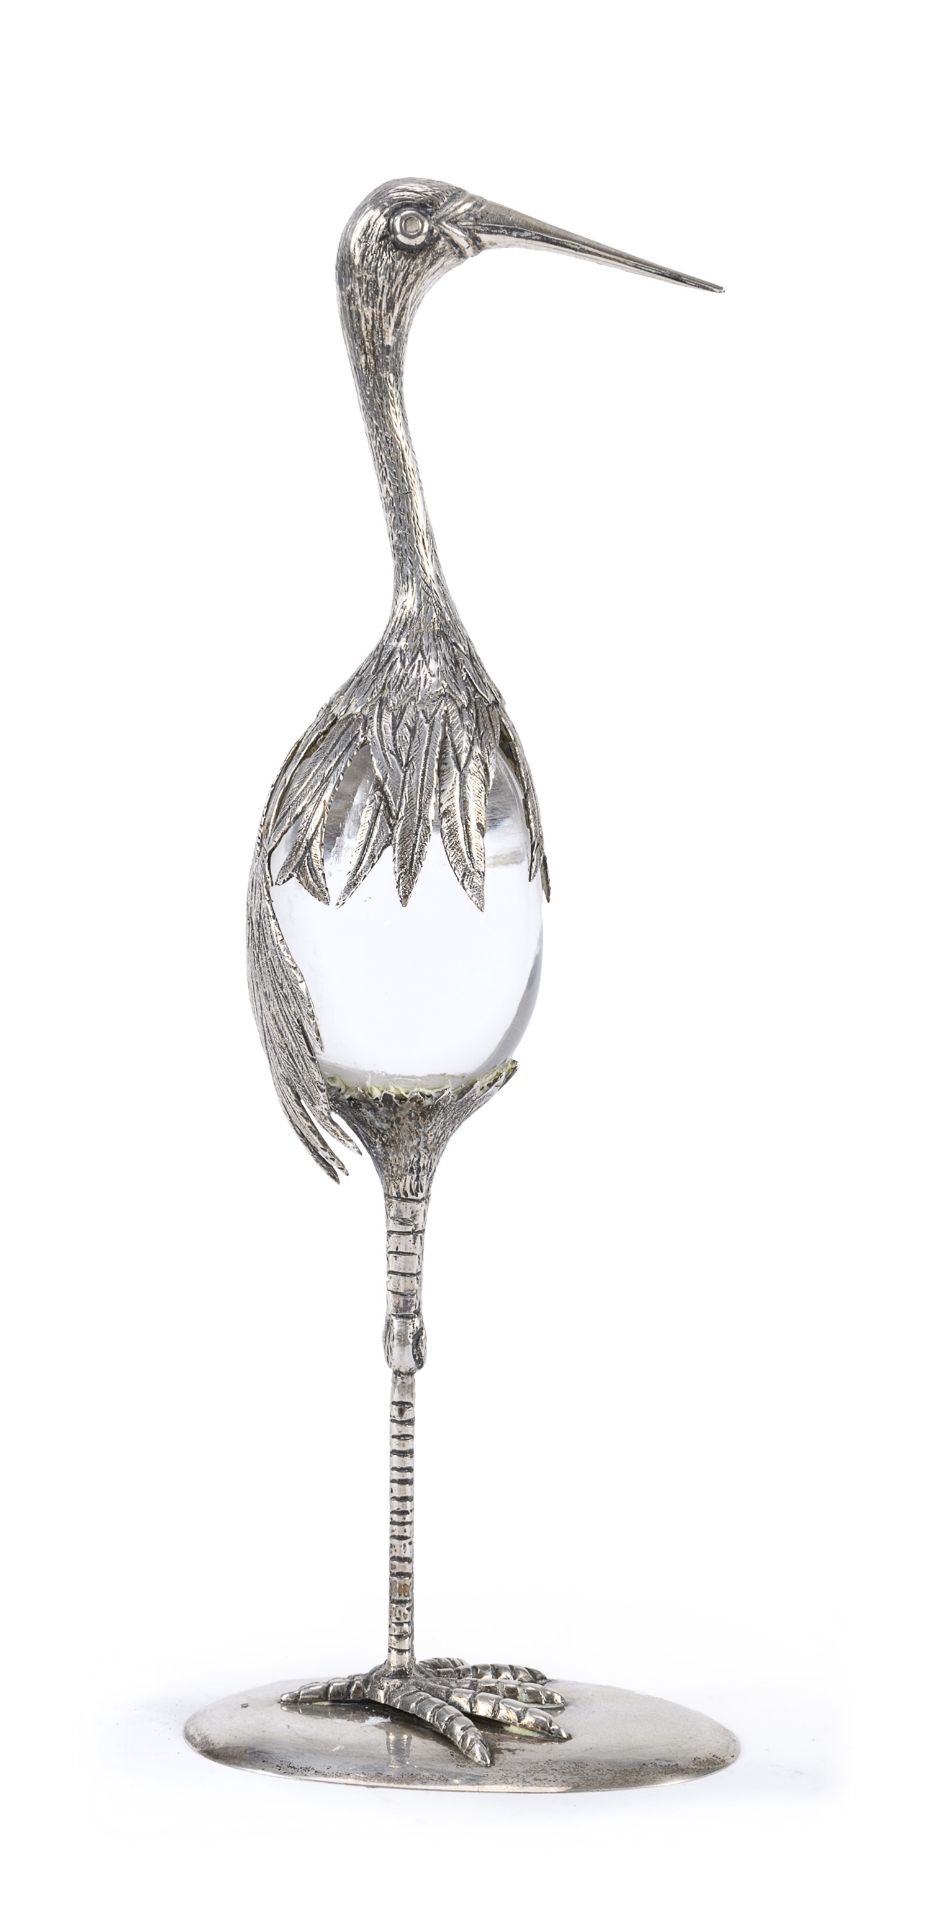 SILVER AND CRYSTAL SCULPTURE END OF 19TH EARLY 20TH CENTURY